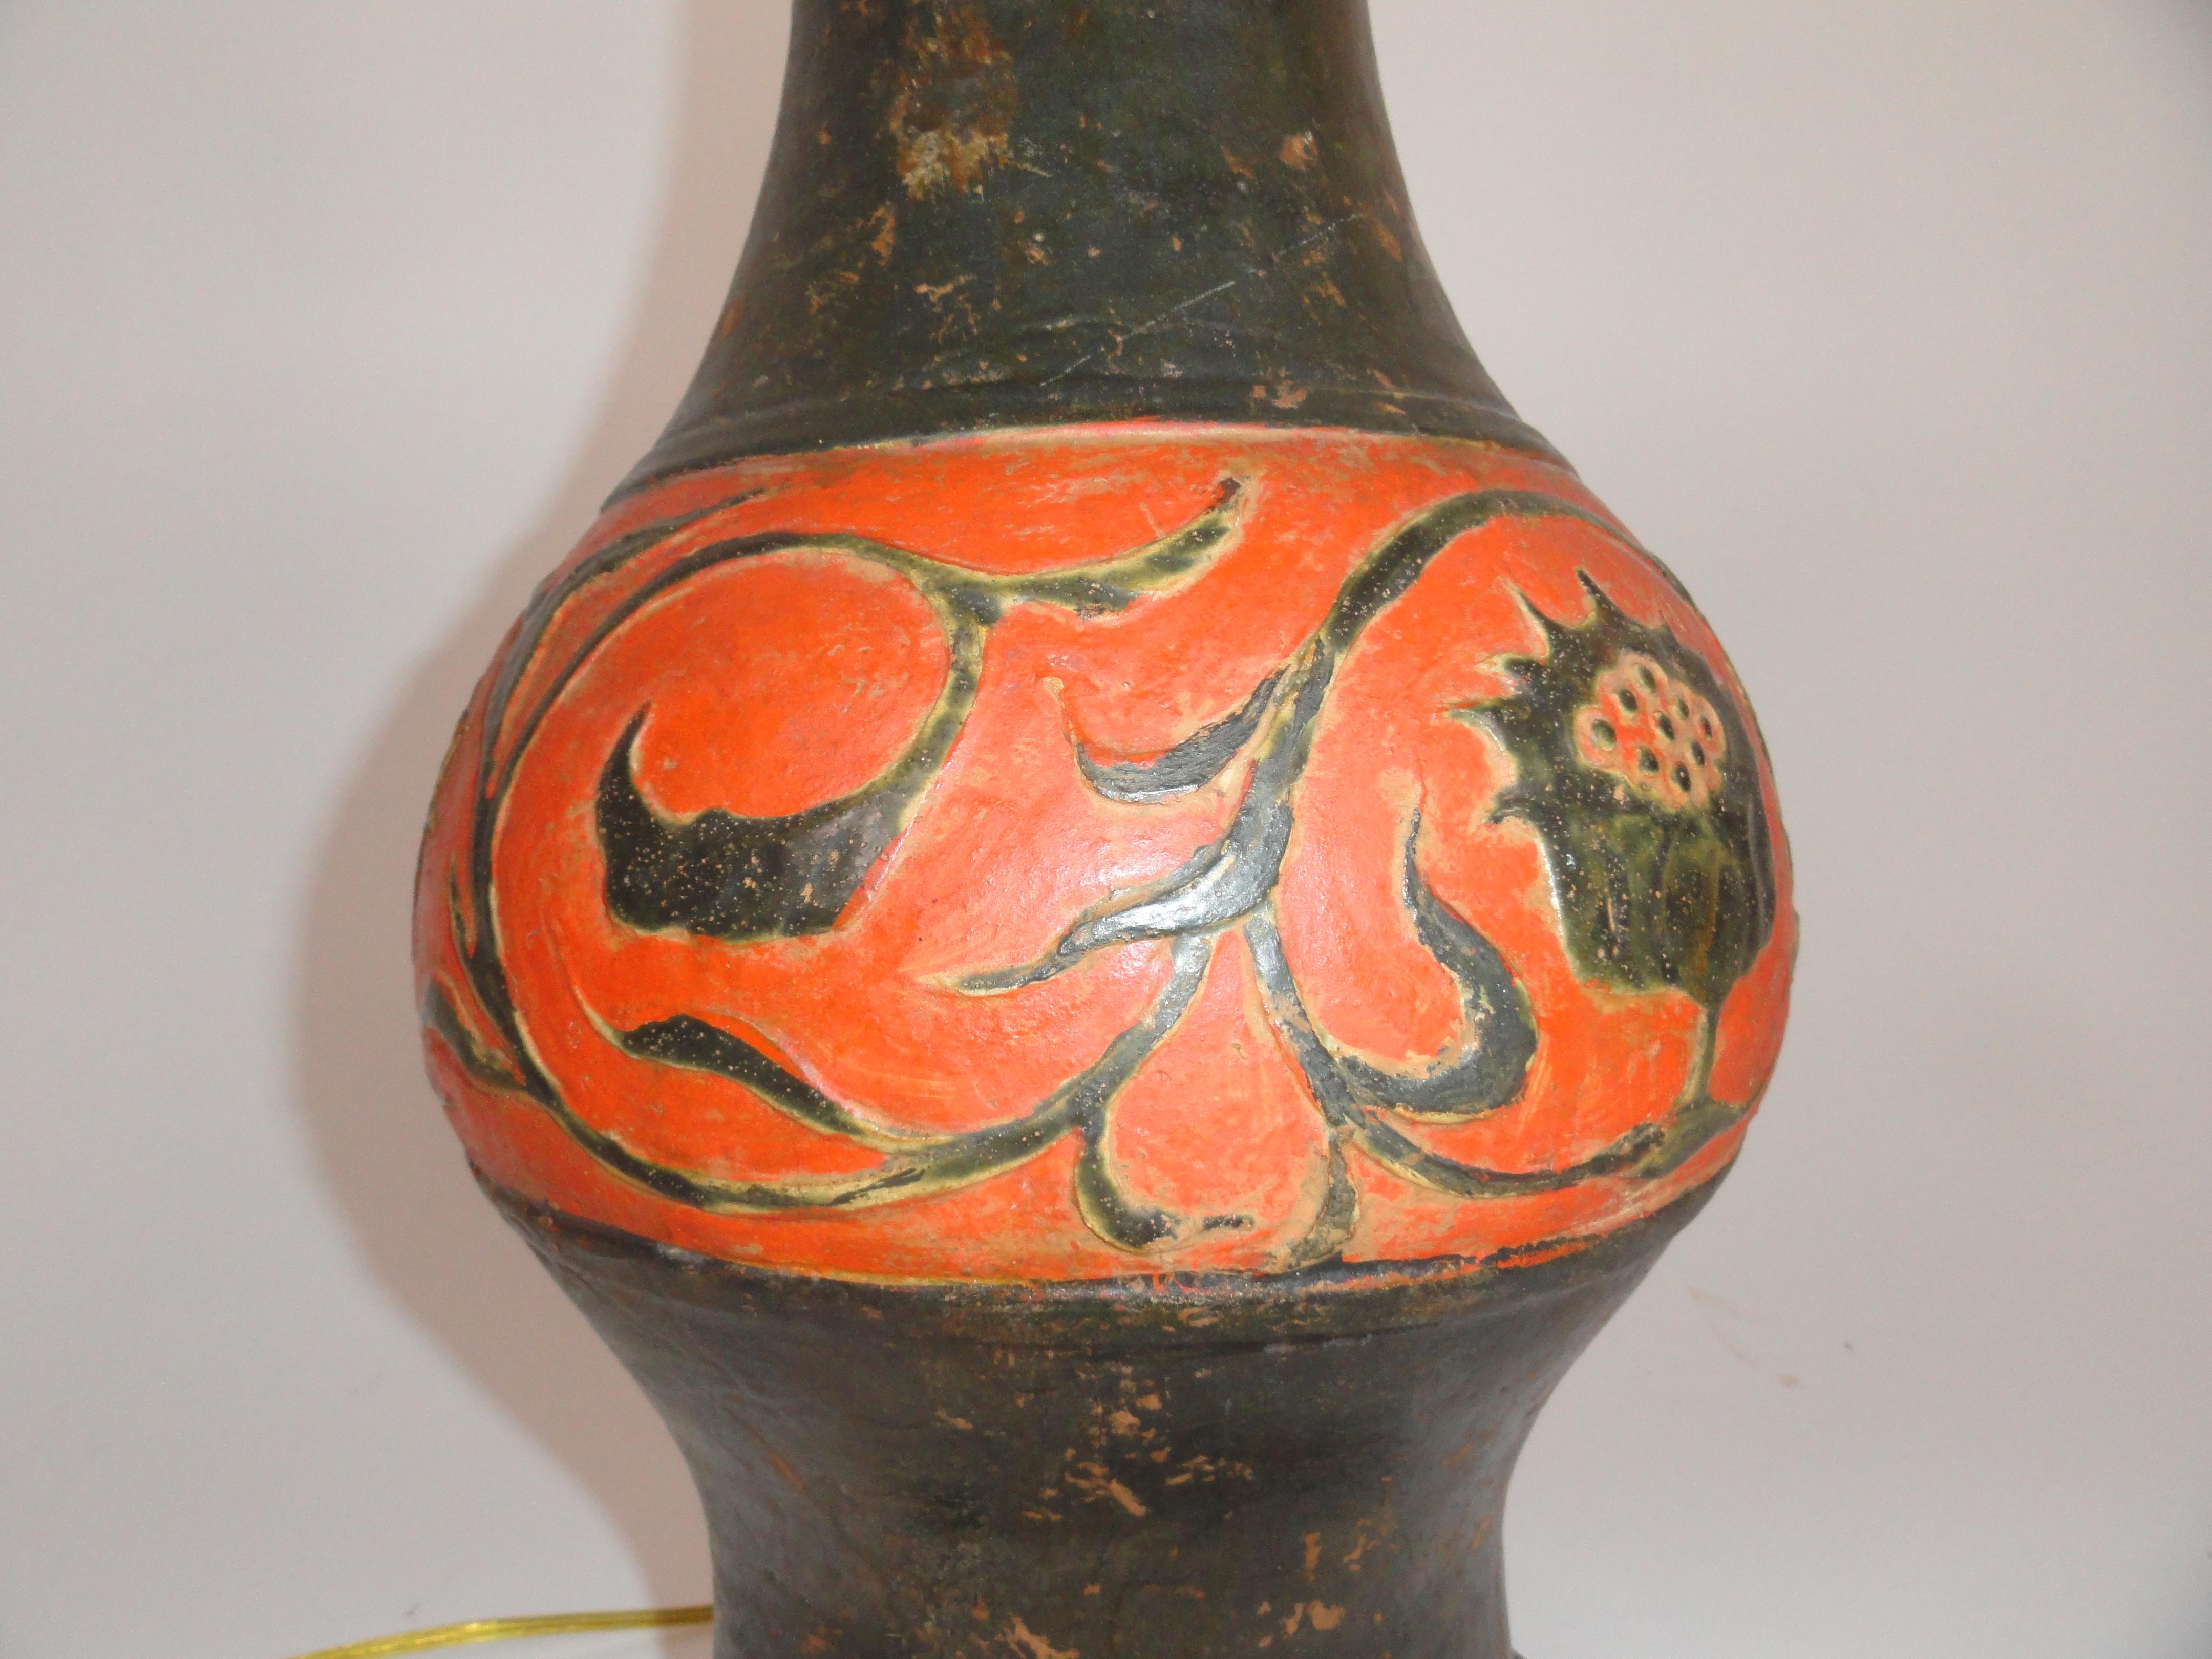 Etruscan style lamp. Ceramic vase lamp in the Etruscan taste with a naturally worn finish.
Measures 20.5